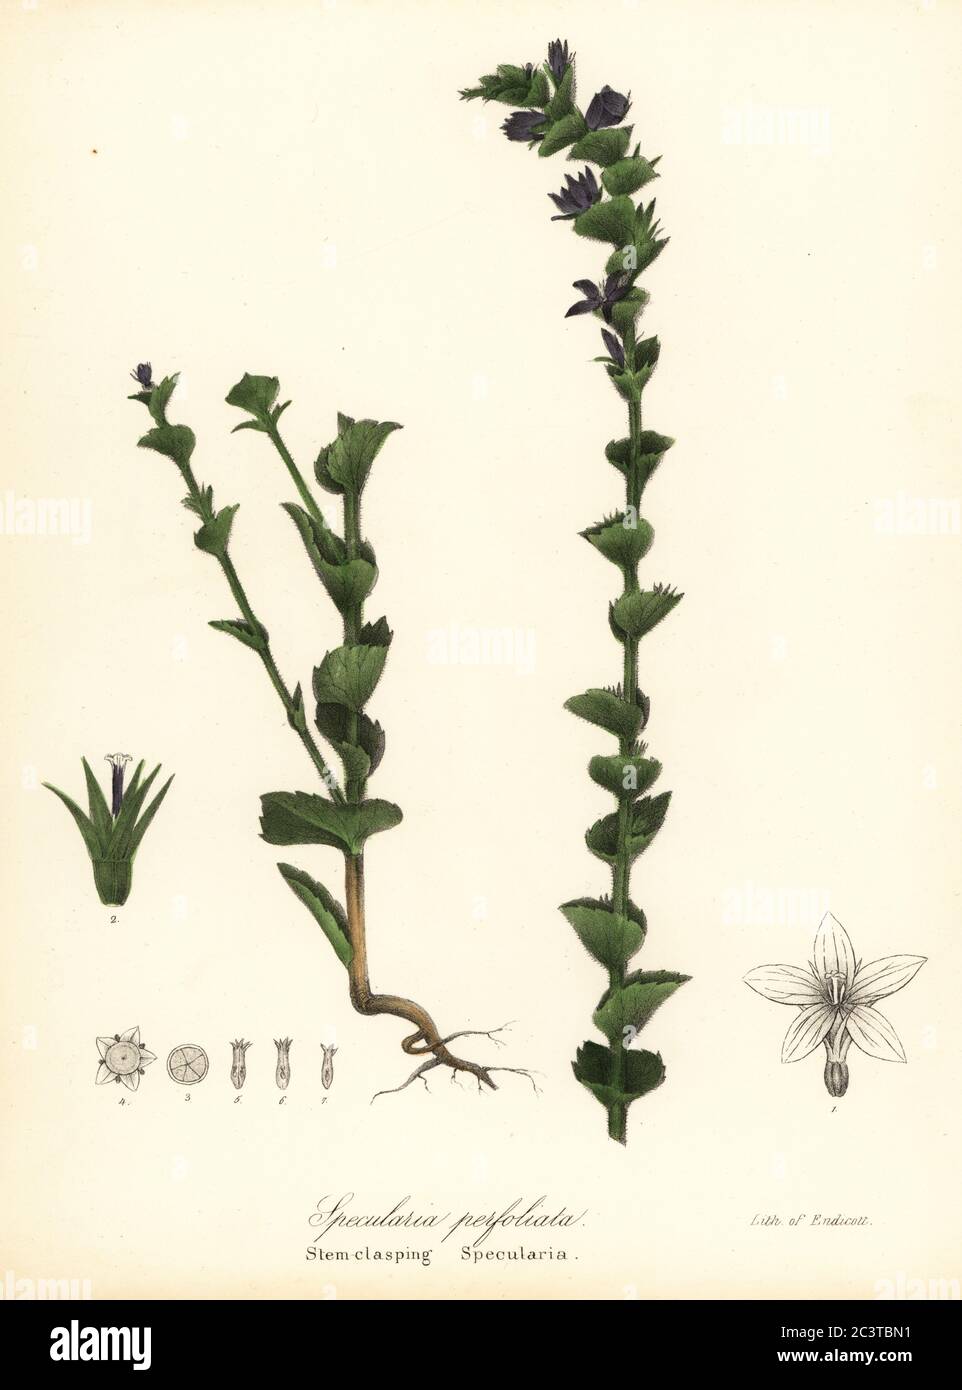 Clasping Venus' looking-glass or clasping bellflower, Triodanis perfoliata (Stem-clasping specularia, Specularia perfoliata). Handcoloured lithograph by Endicott after a botanical illustration from John Torrey’s A Flora of the State of New York, Carroll and Cook, Albany, 1843. The plates drawn by John Torrey, Agnes Mitchell, Elizabeth Paoley and Swinton. John Torrey was an American botanist, chemist and physician 1796-1873. Stock Photo